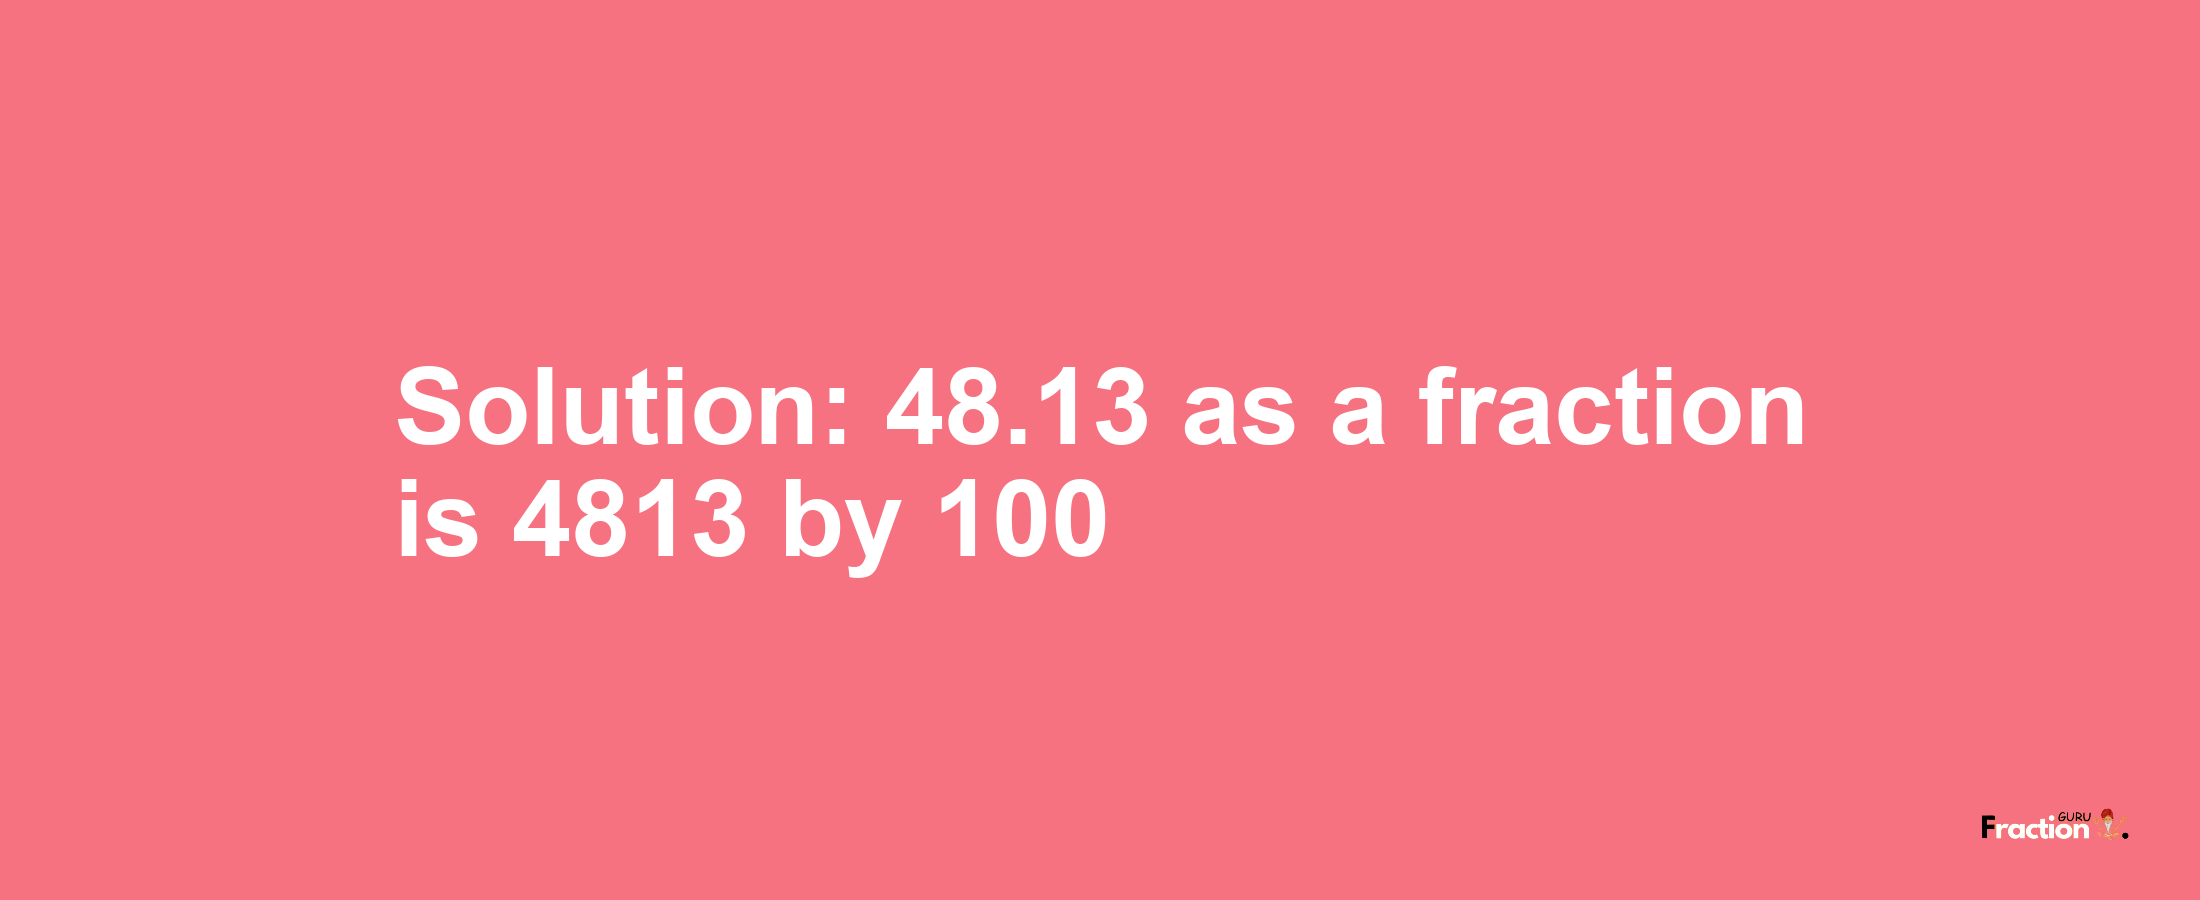 Solution:48.13 as a fraction is 4813/100